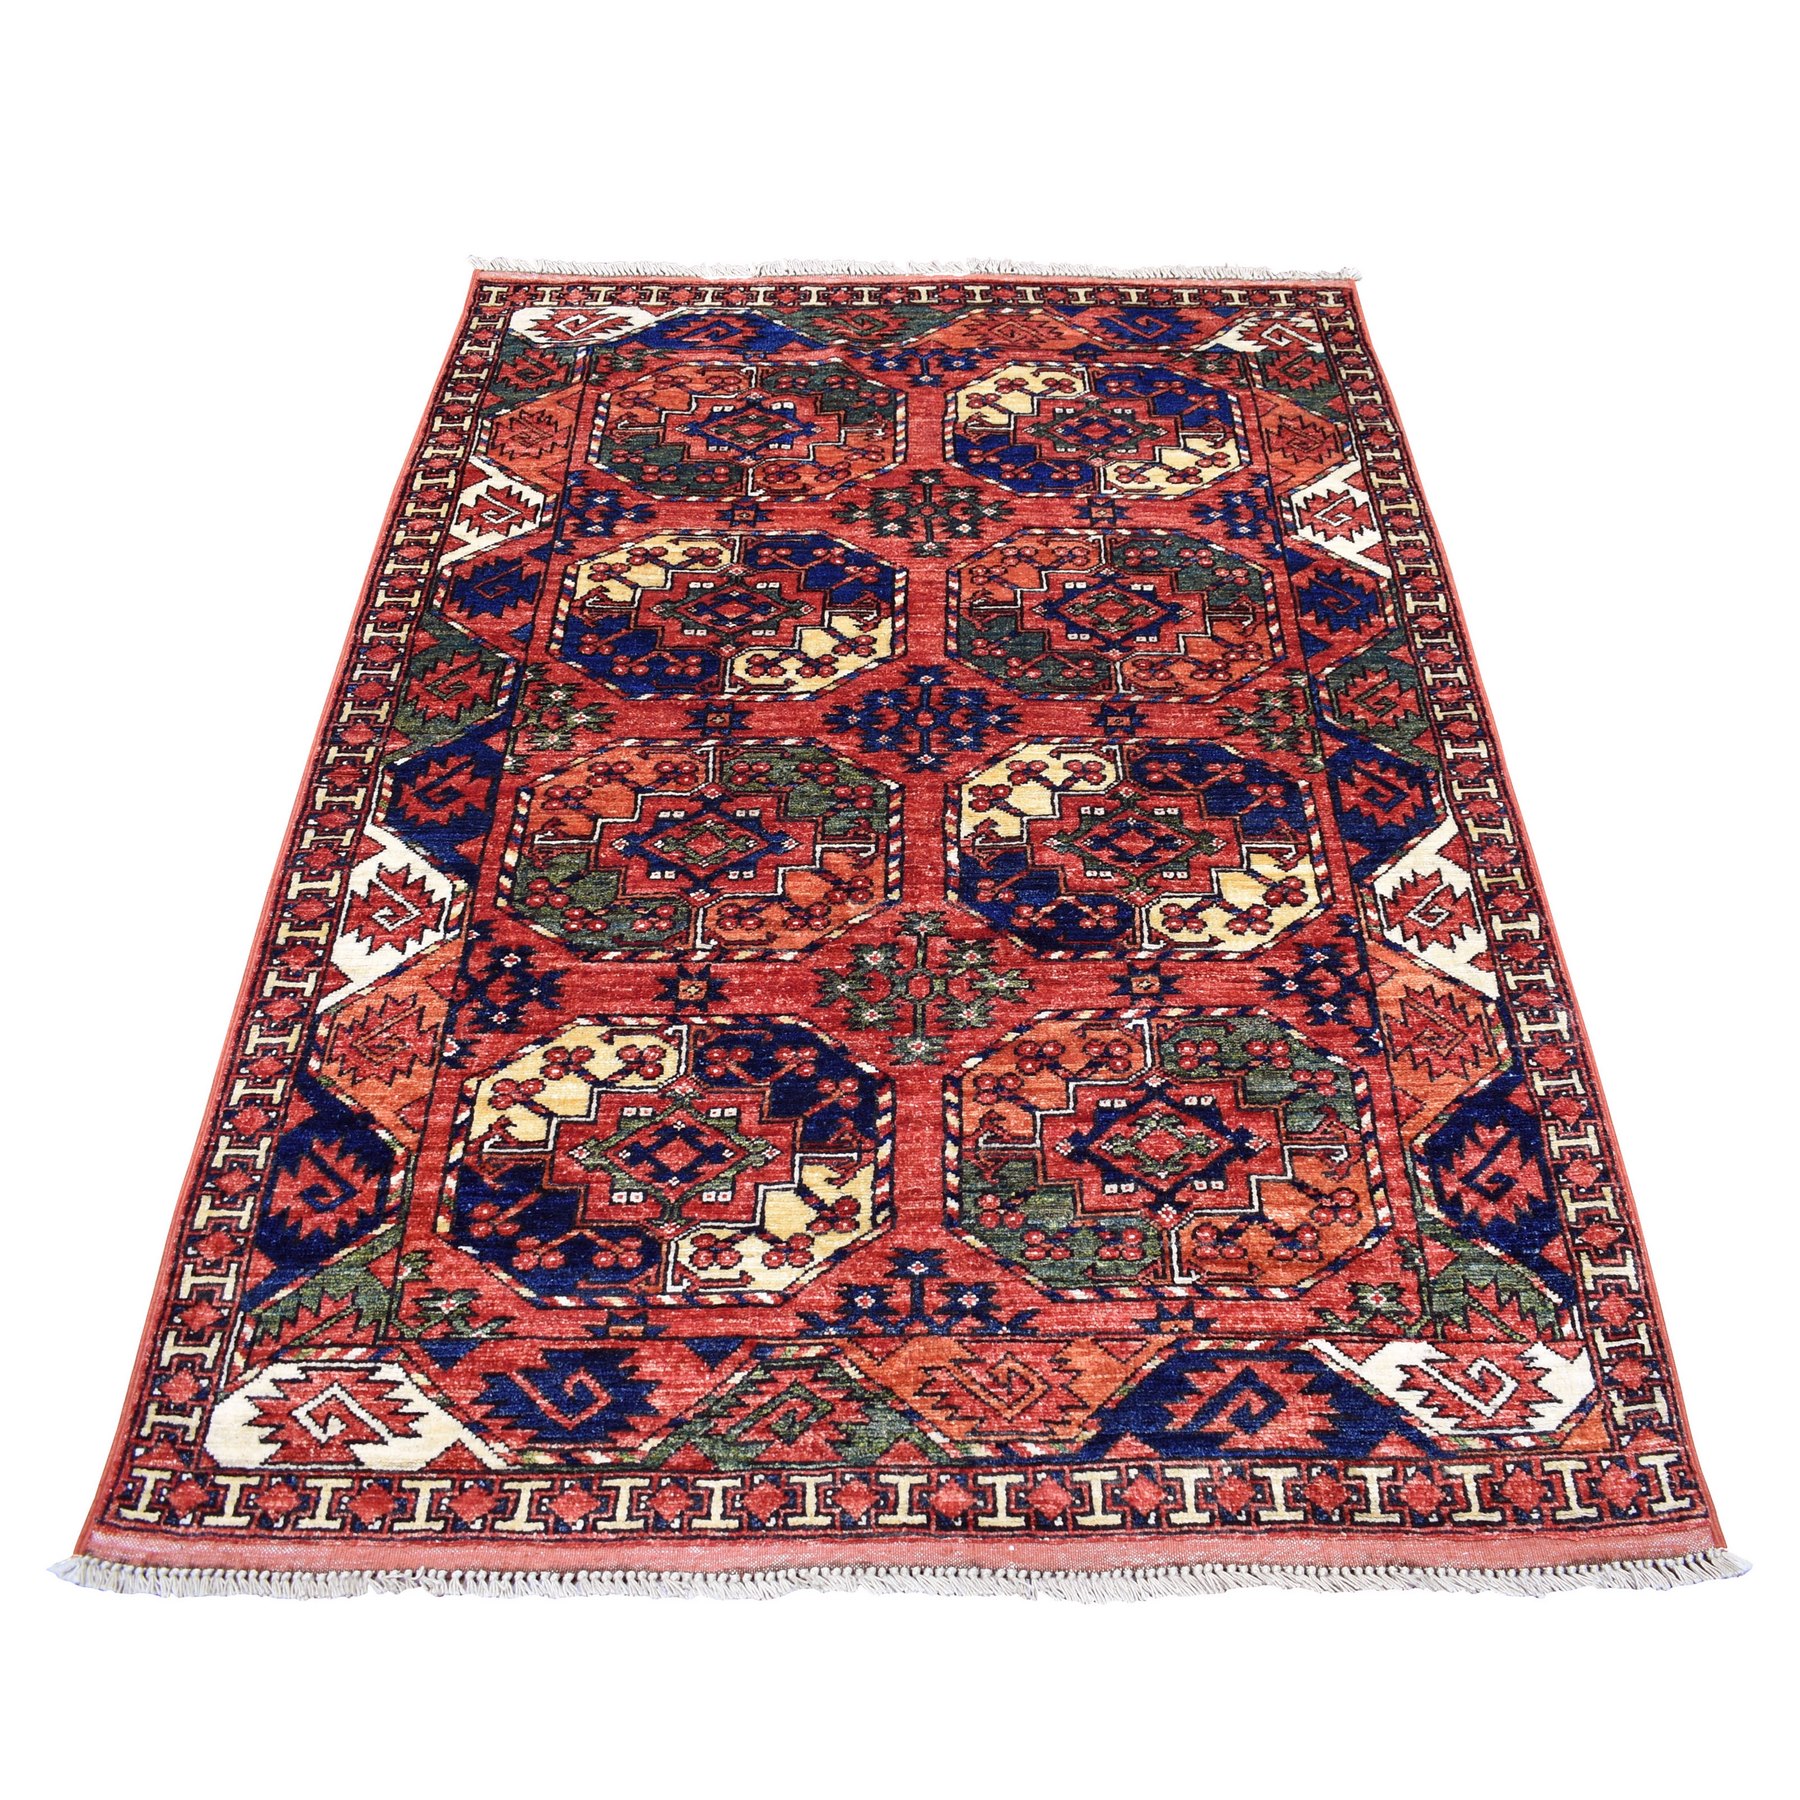 4'1"x5'10" Coral Red Afghan Ersari with Elephant Feet Design Hand Woven Soft, Vibrant Wool Oriental Rug 